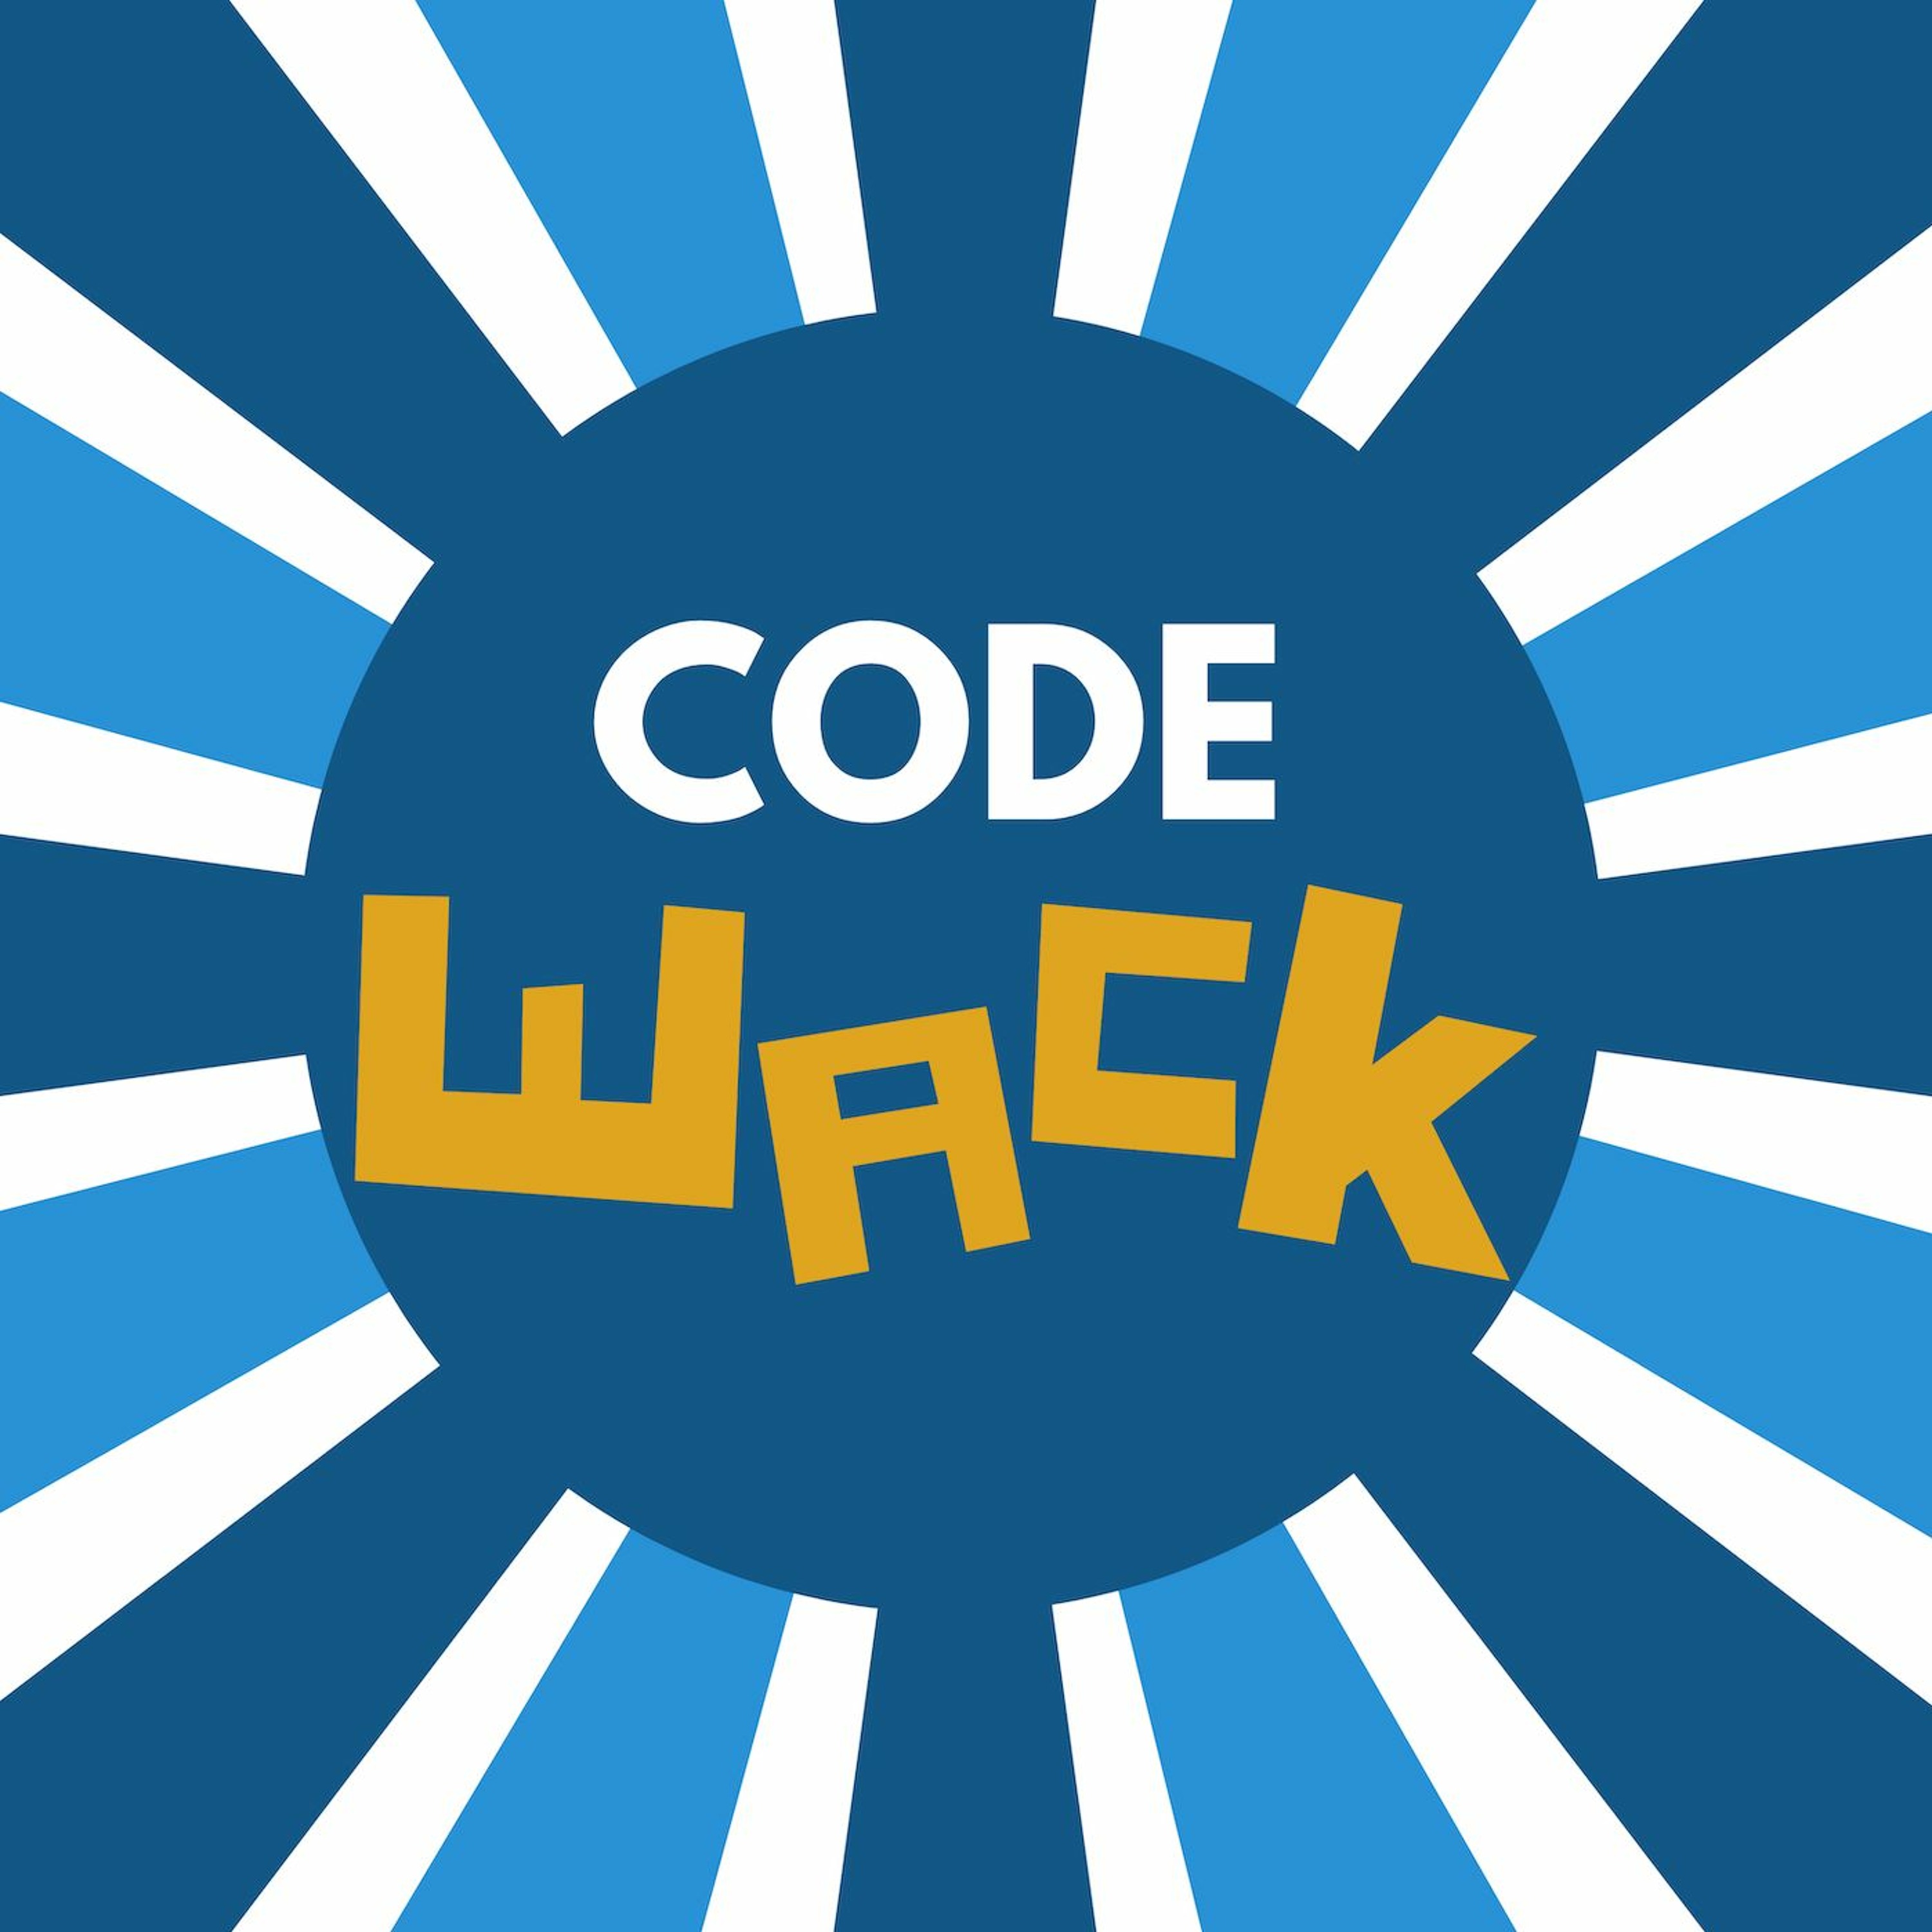 Code Wack - Simplicity, savings & equity? The single-payer solution